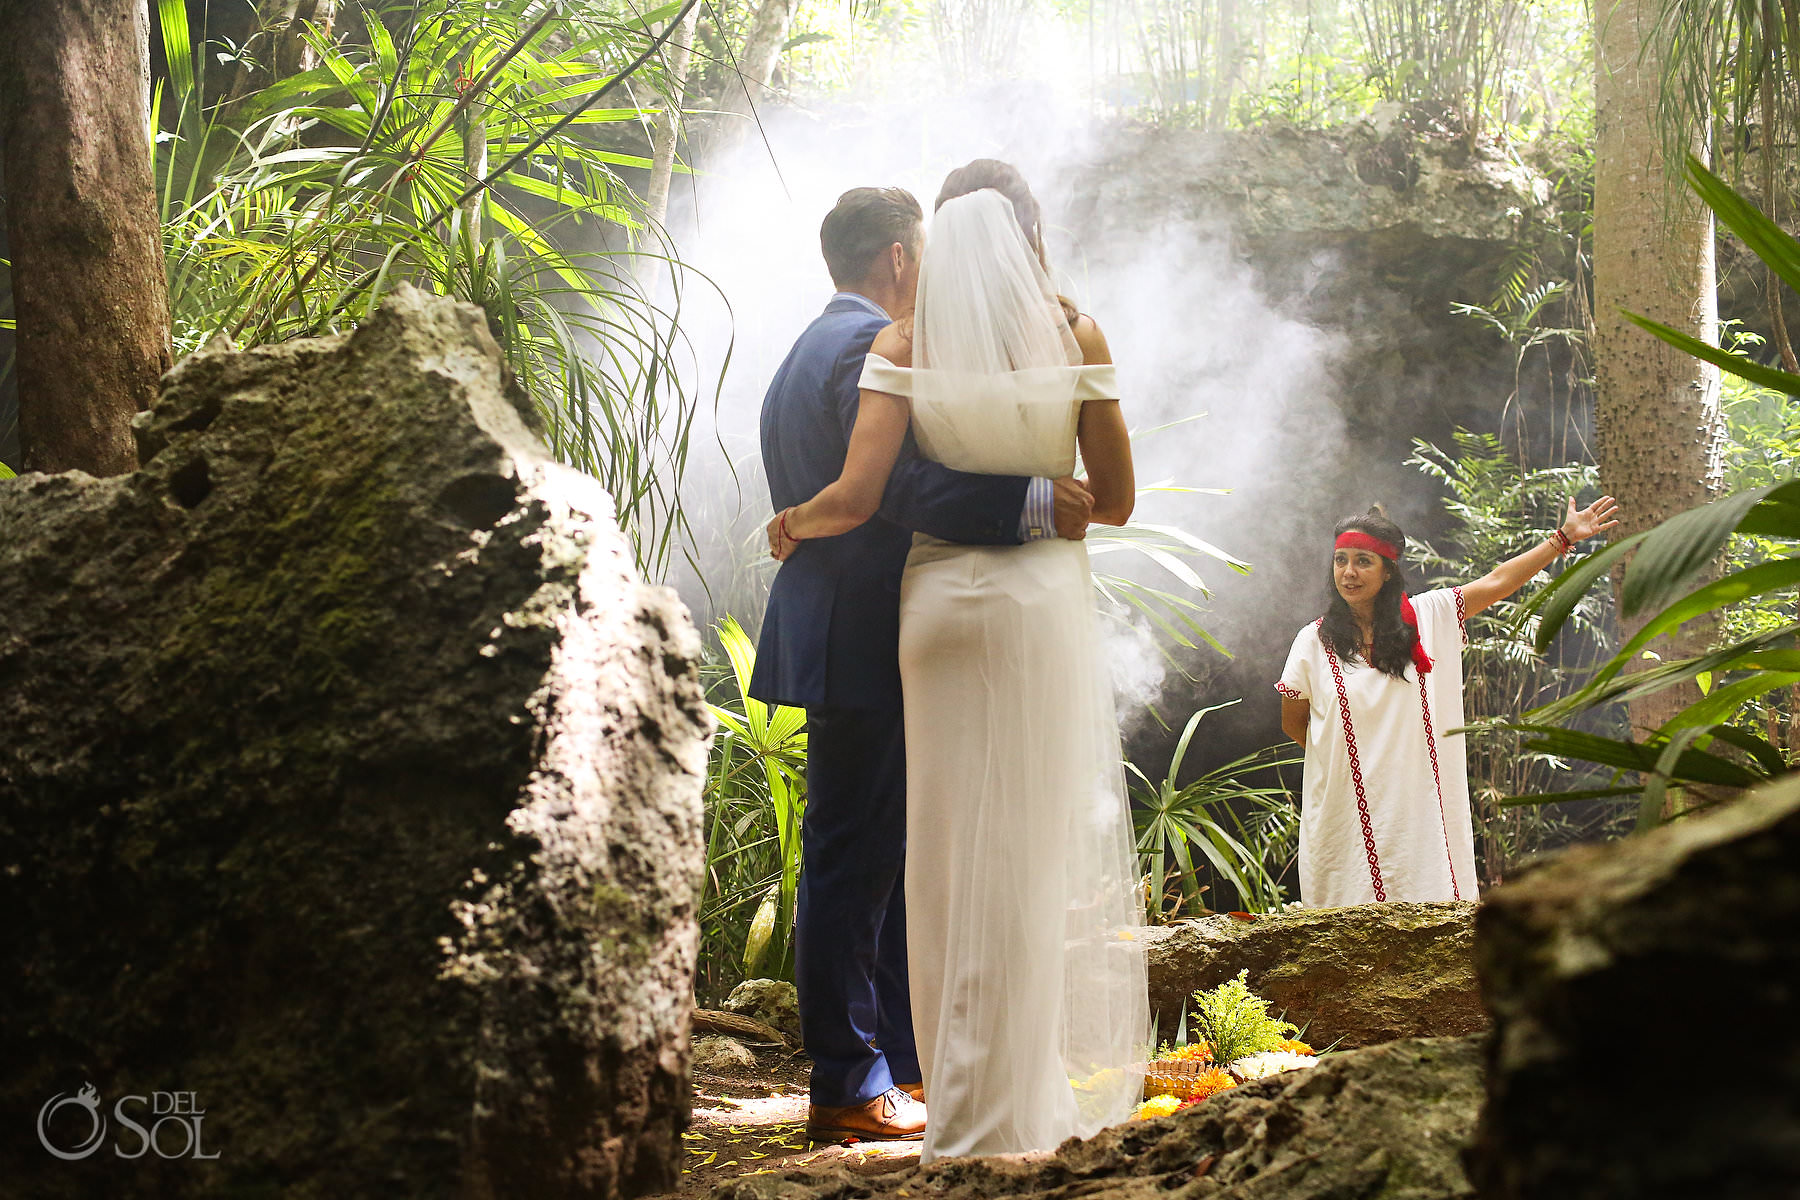 Eloping in a cenote in Mexico